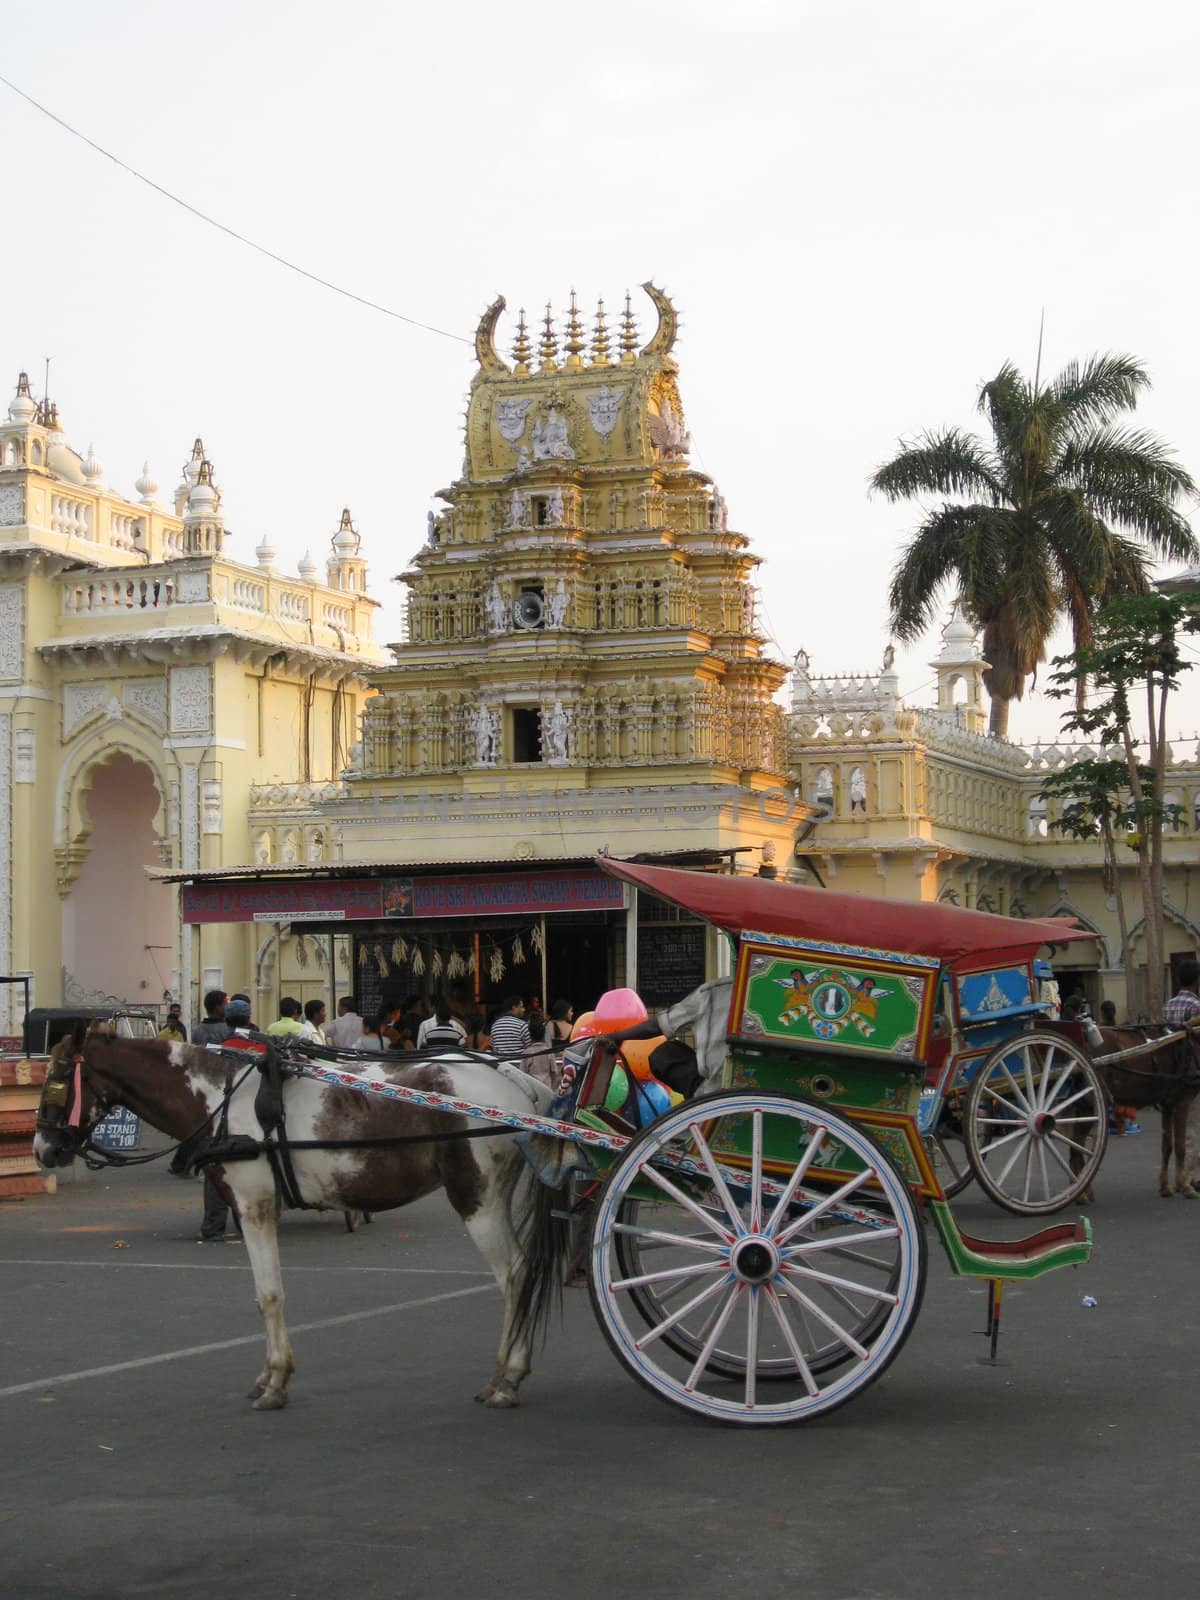 A colourful chariot for the enjoyment of tourists, Mysore, India